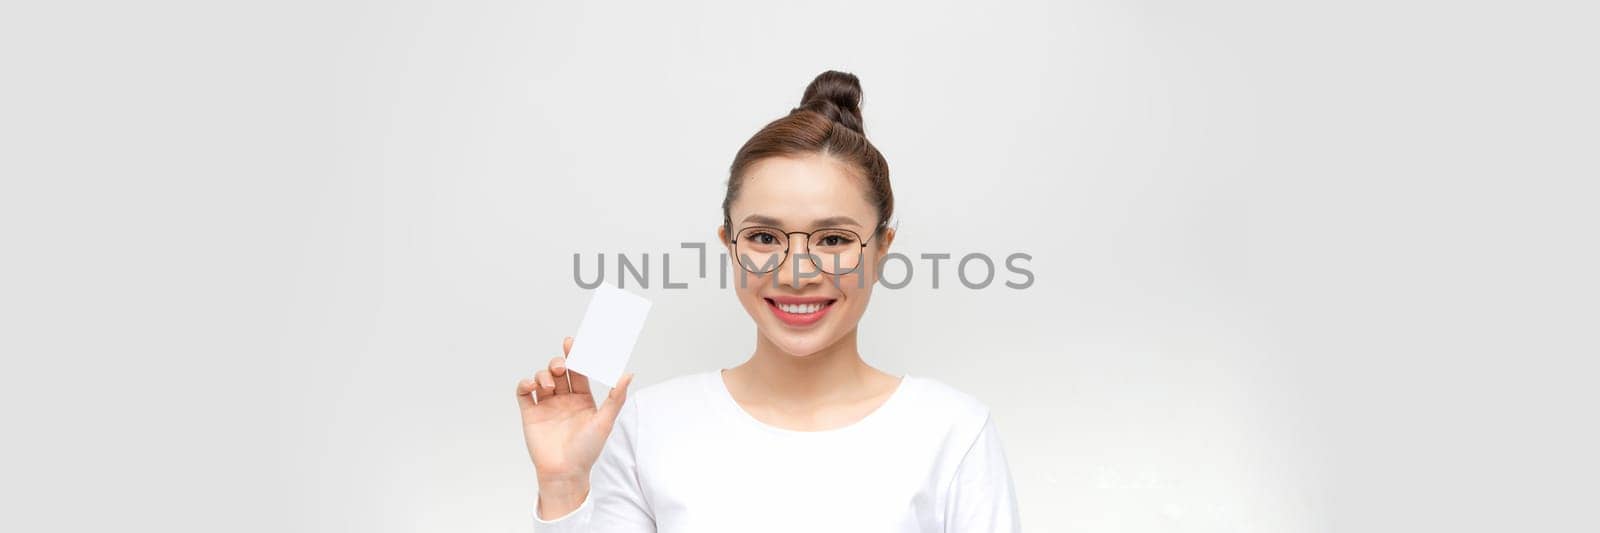 Woman showing business card on white background